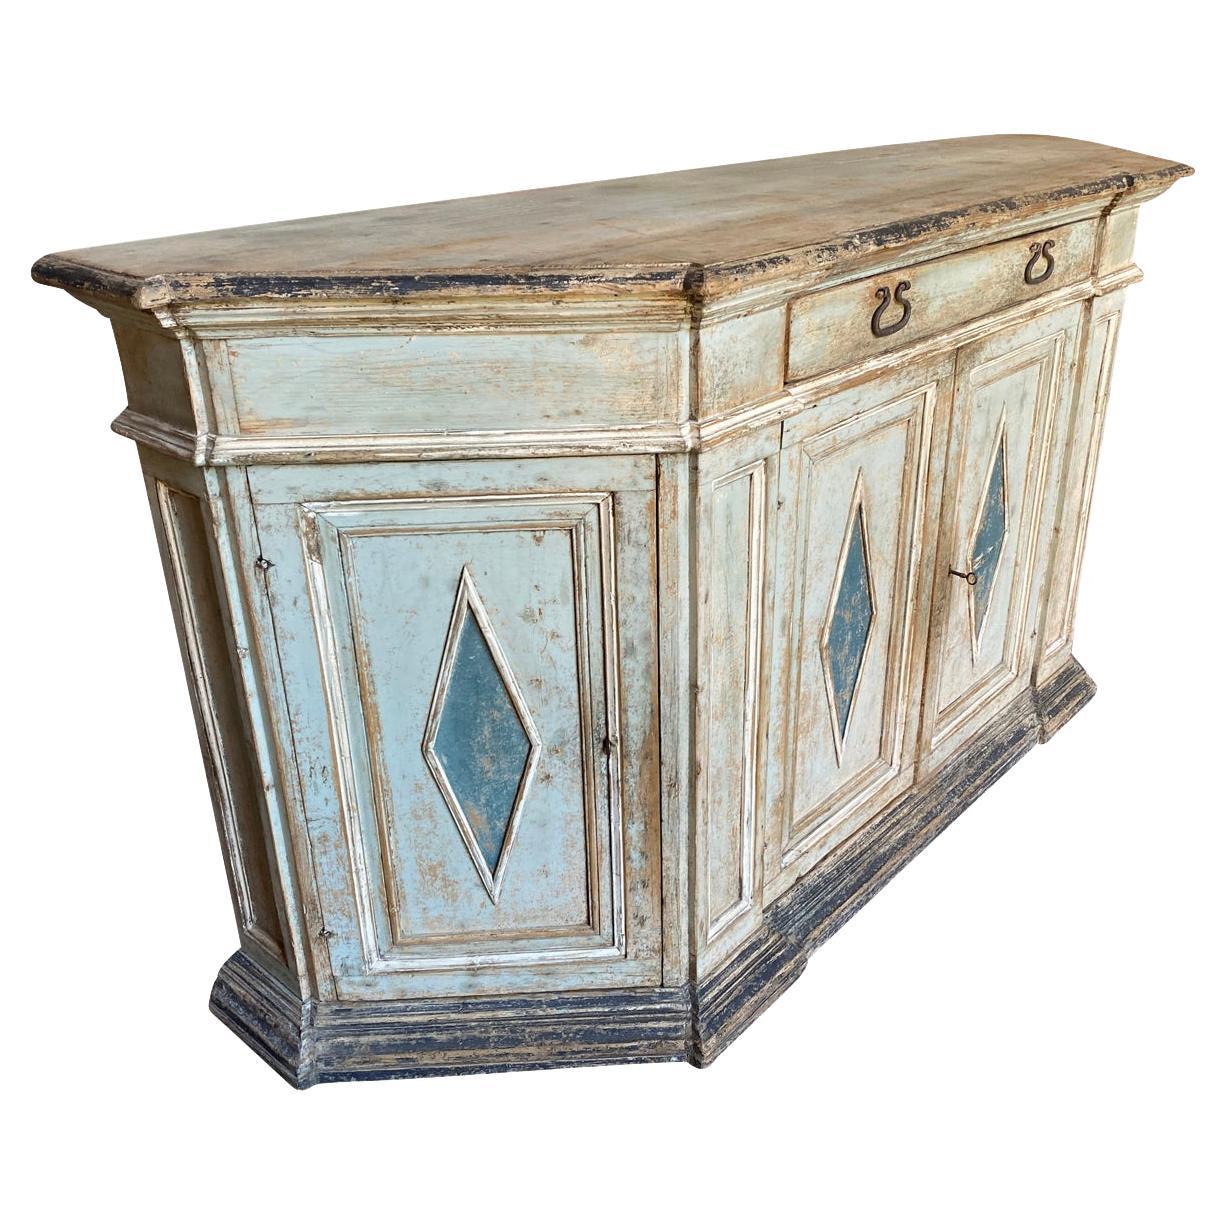 A stunning 18th century Cedenza from Bologna, Italy. Soundly constructed from painted wood in scantonata form, handsome edge finish to the top plank, a single drawer, four doors, interior shelving resting on its plinth base. Wonderful charm and